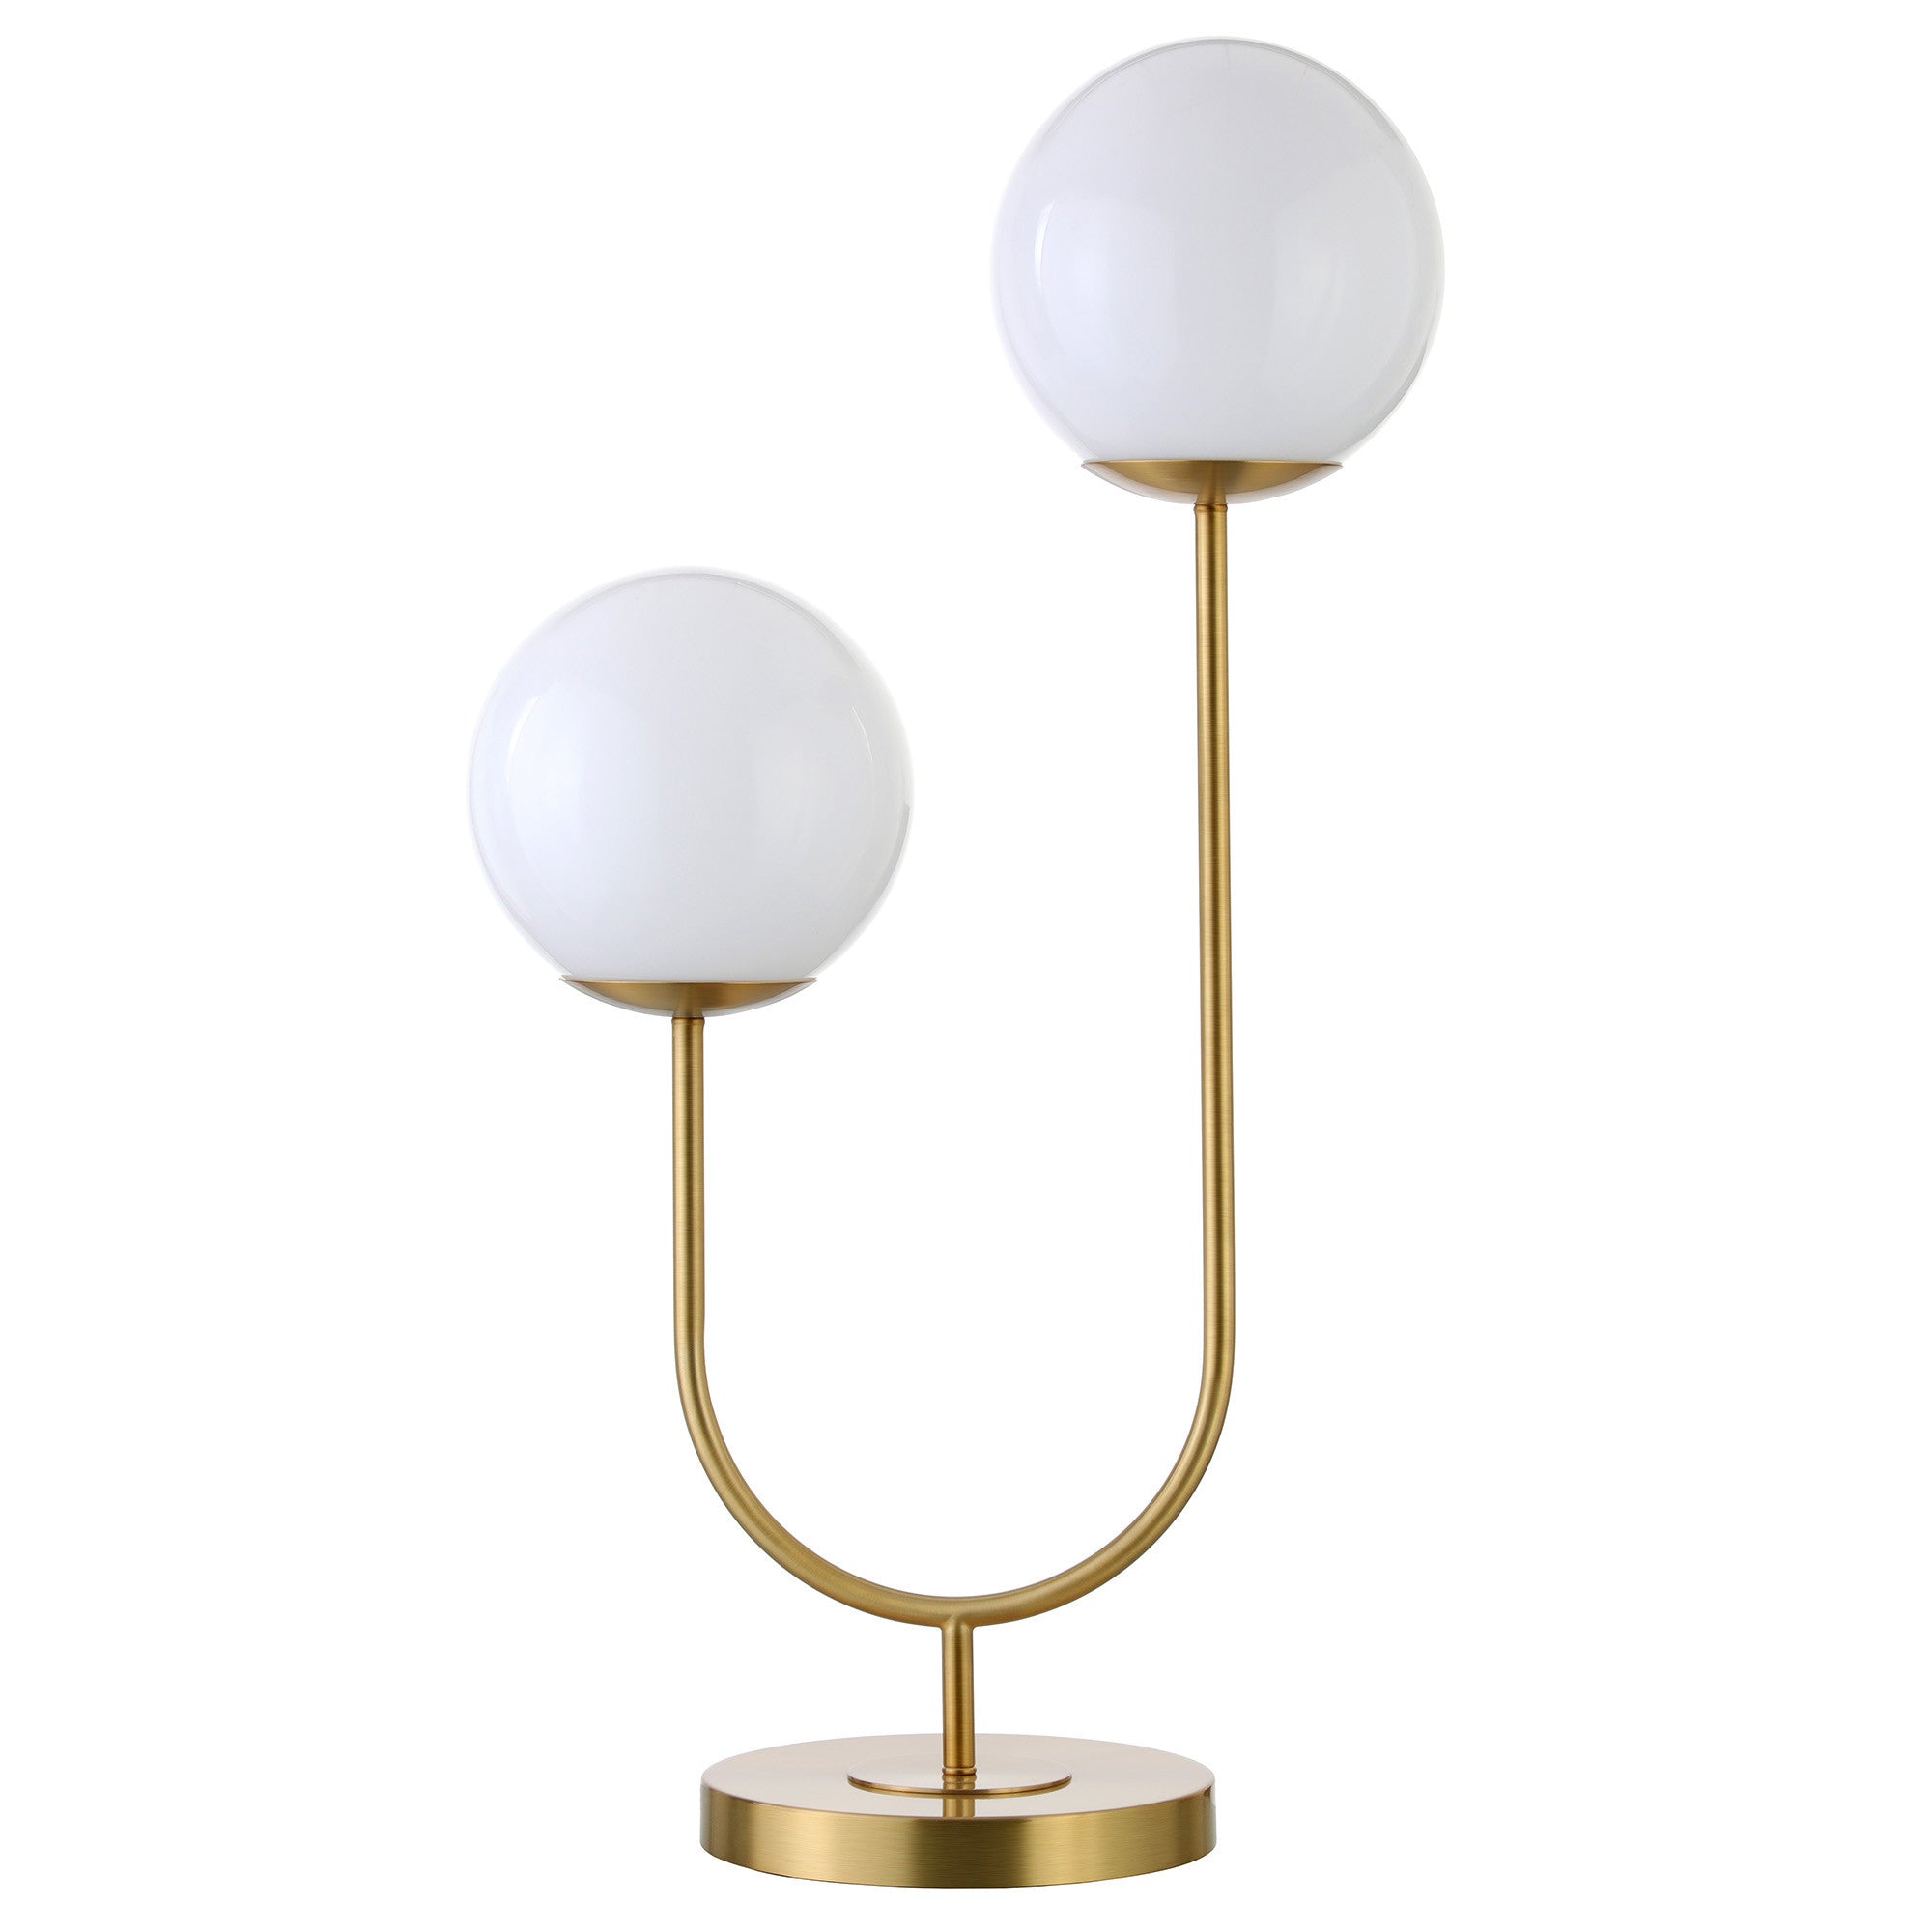 28" Gold Metal Two Light Novelty Globe Table Lamp With White Globe Shade